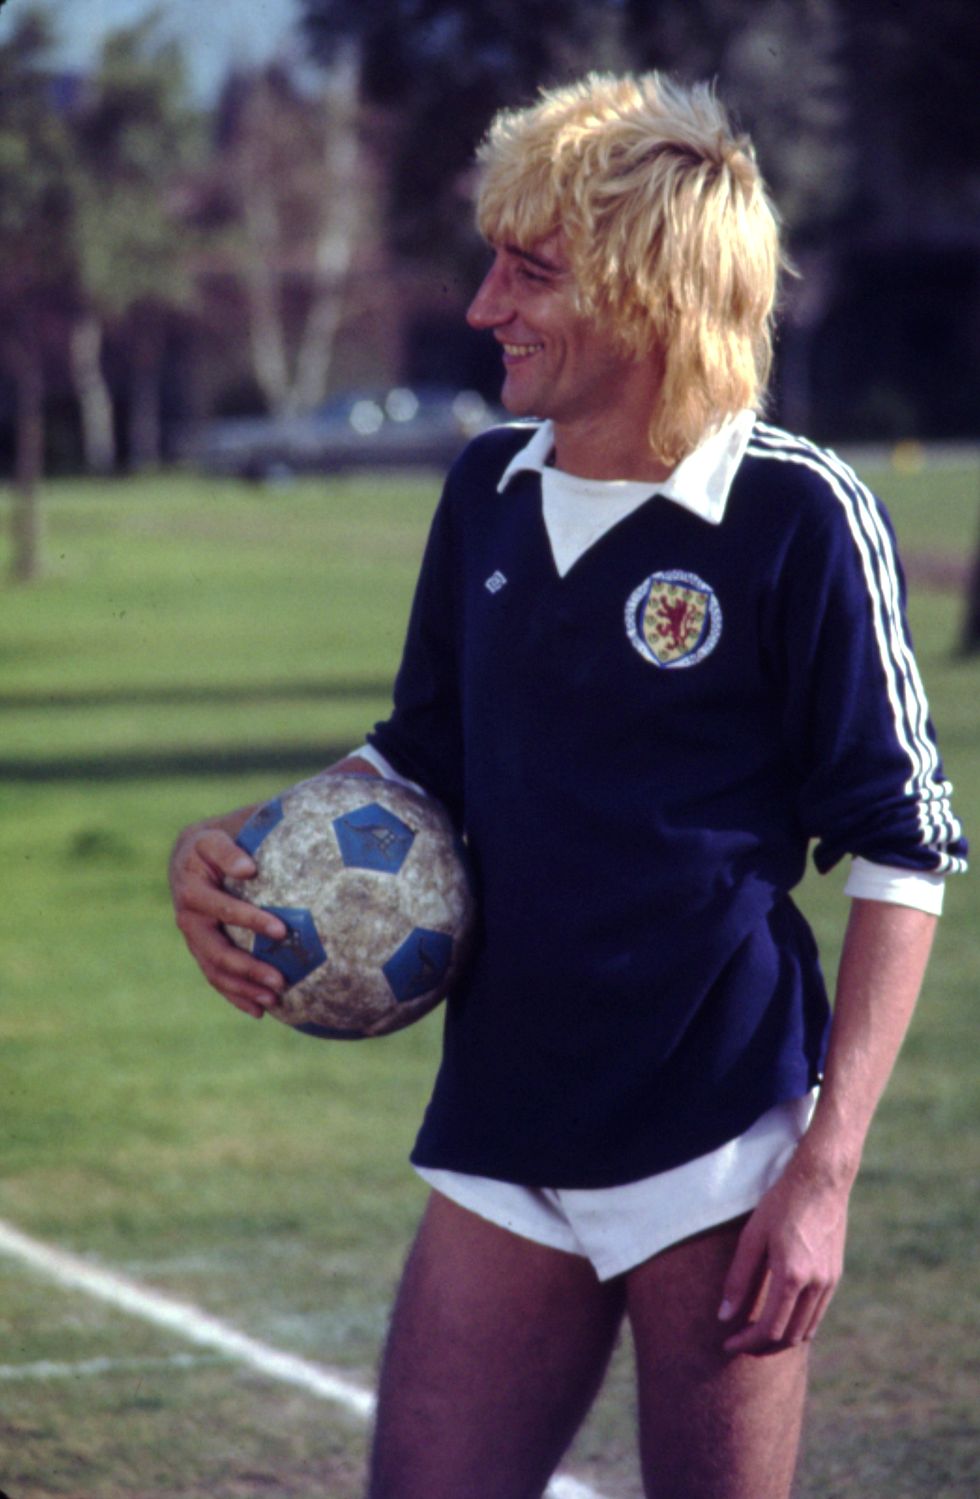 rod stewart's mullet on the soccer, er, football, pitch in 1976